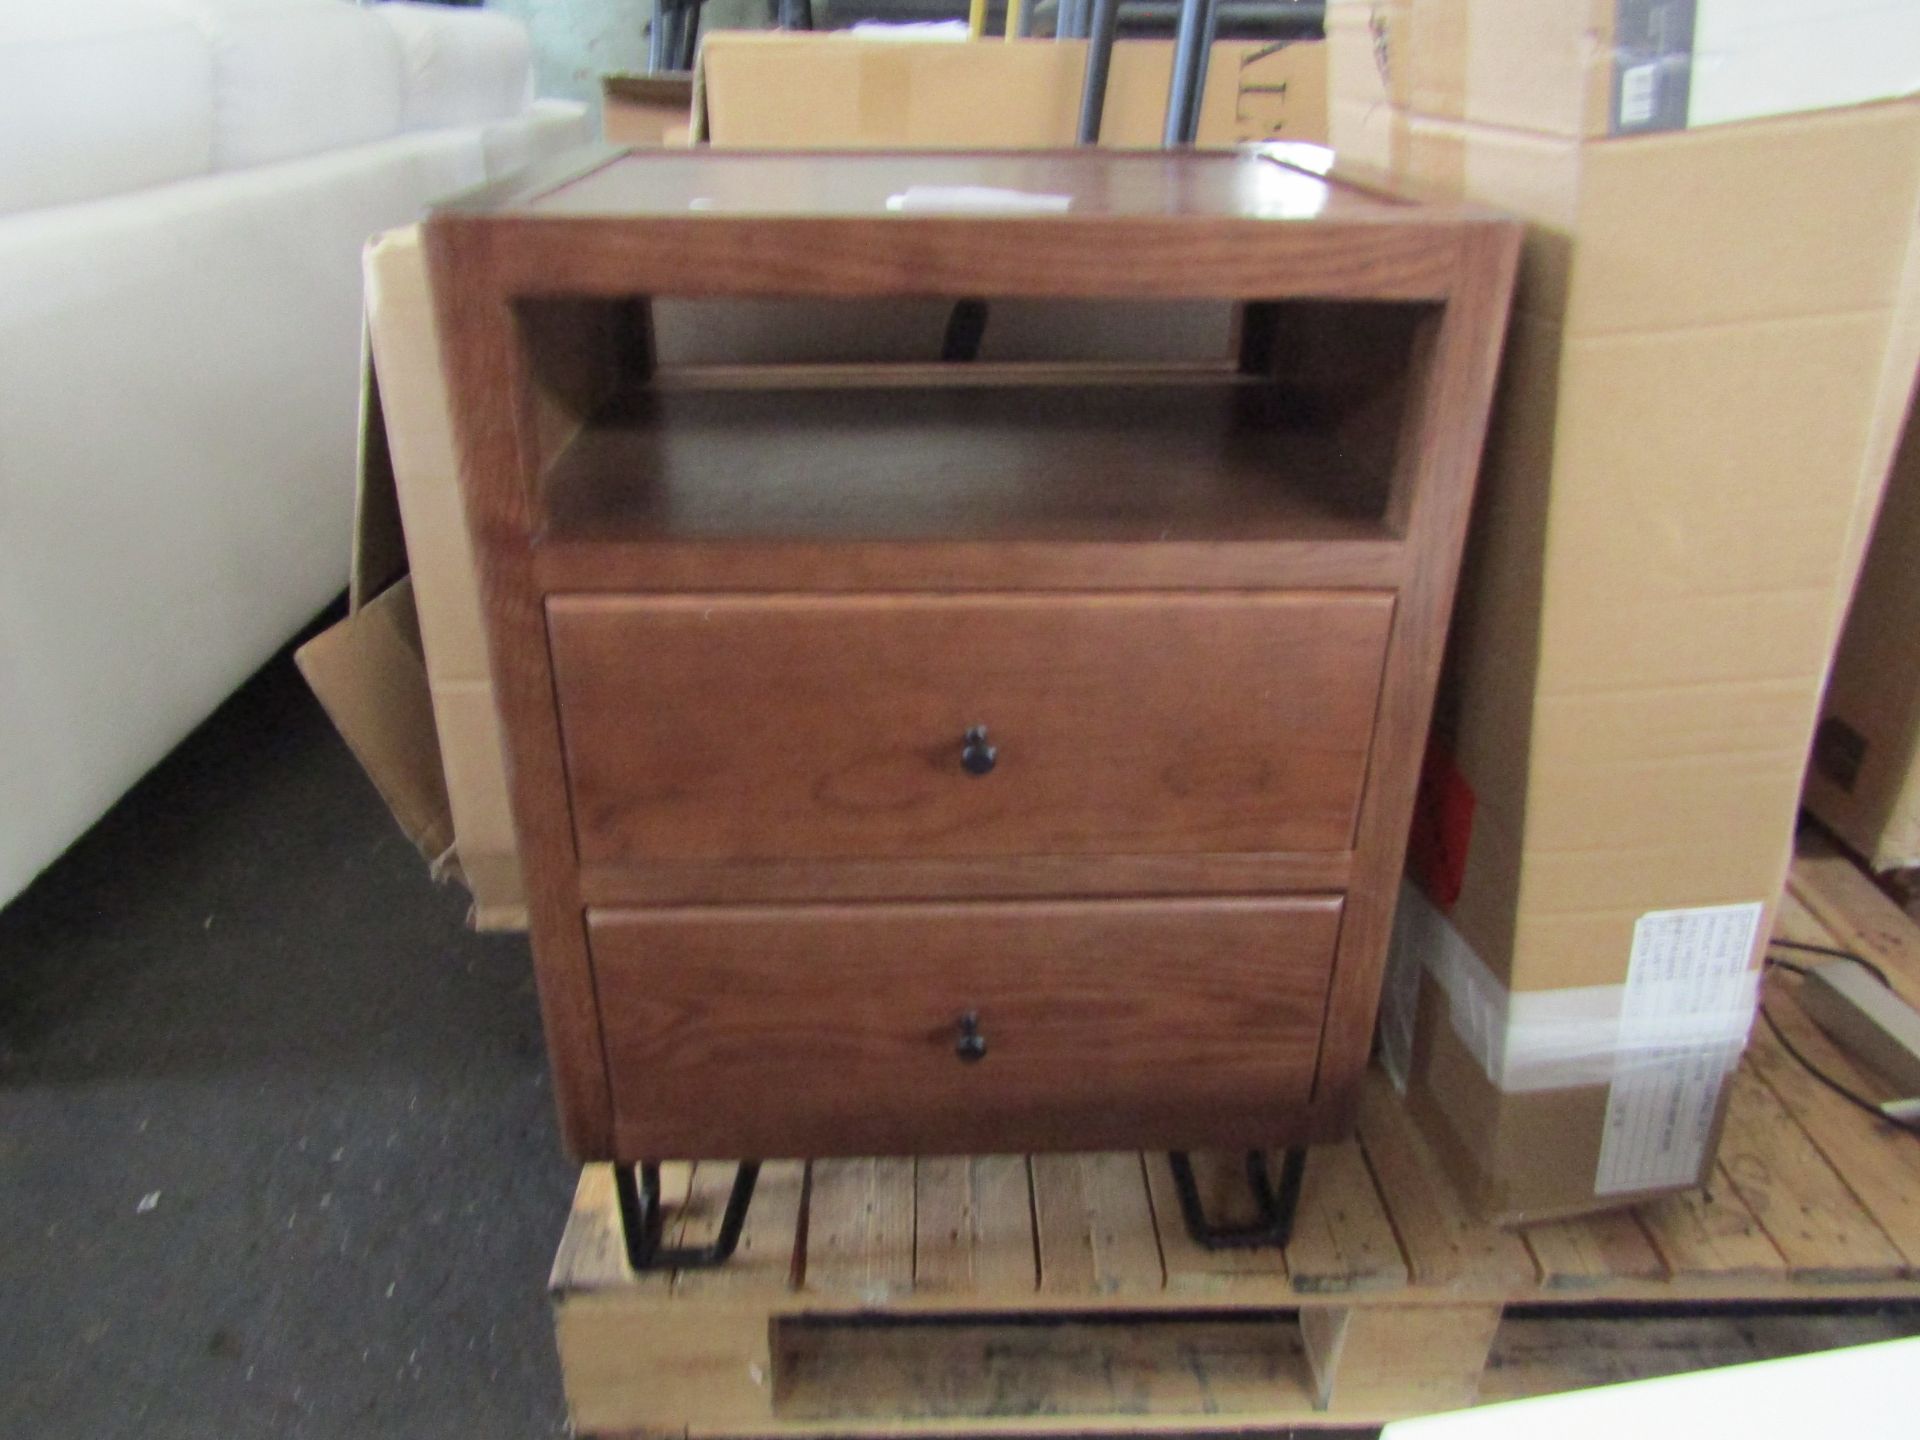 Heals Brunel Bedside Table Dark Wood RRP Â£279.00 - This item looks to be in good condition and